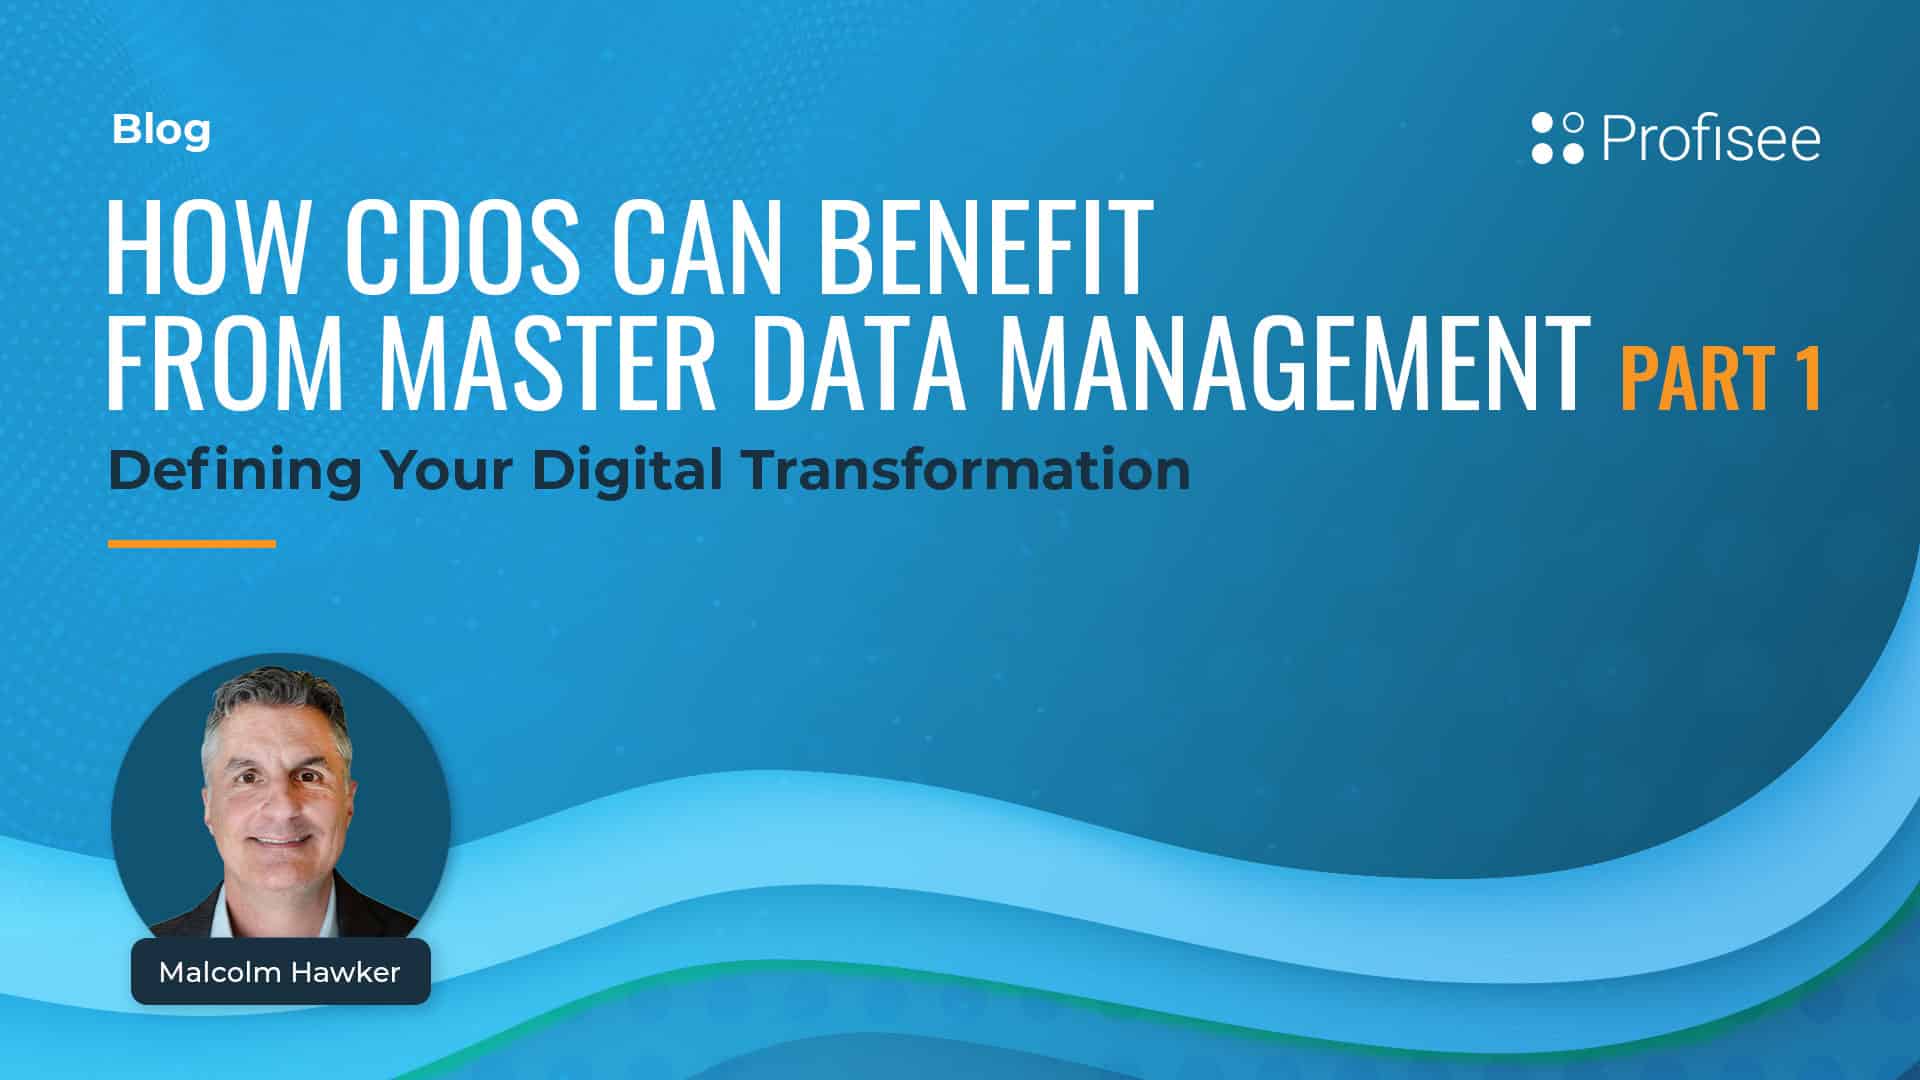 How CDOs Can Benefit from MDM pt. 1